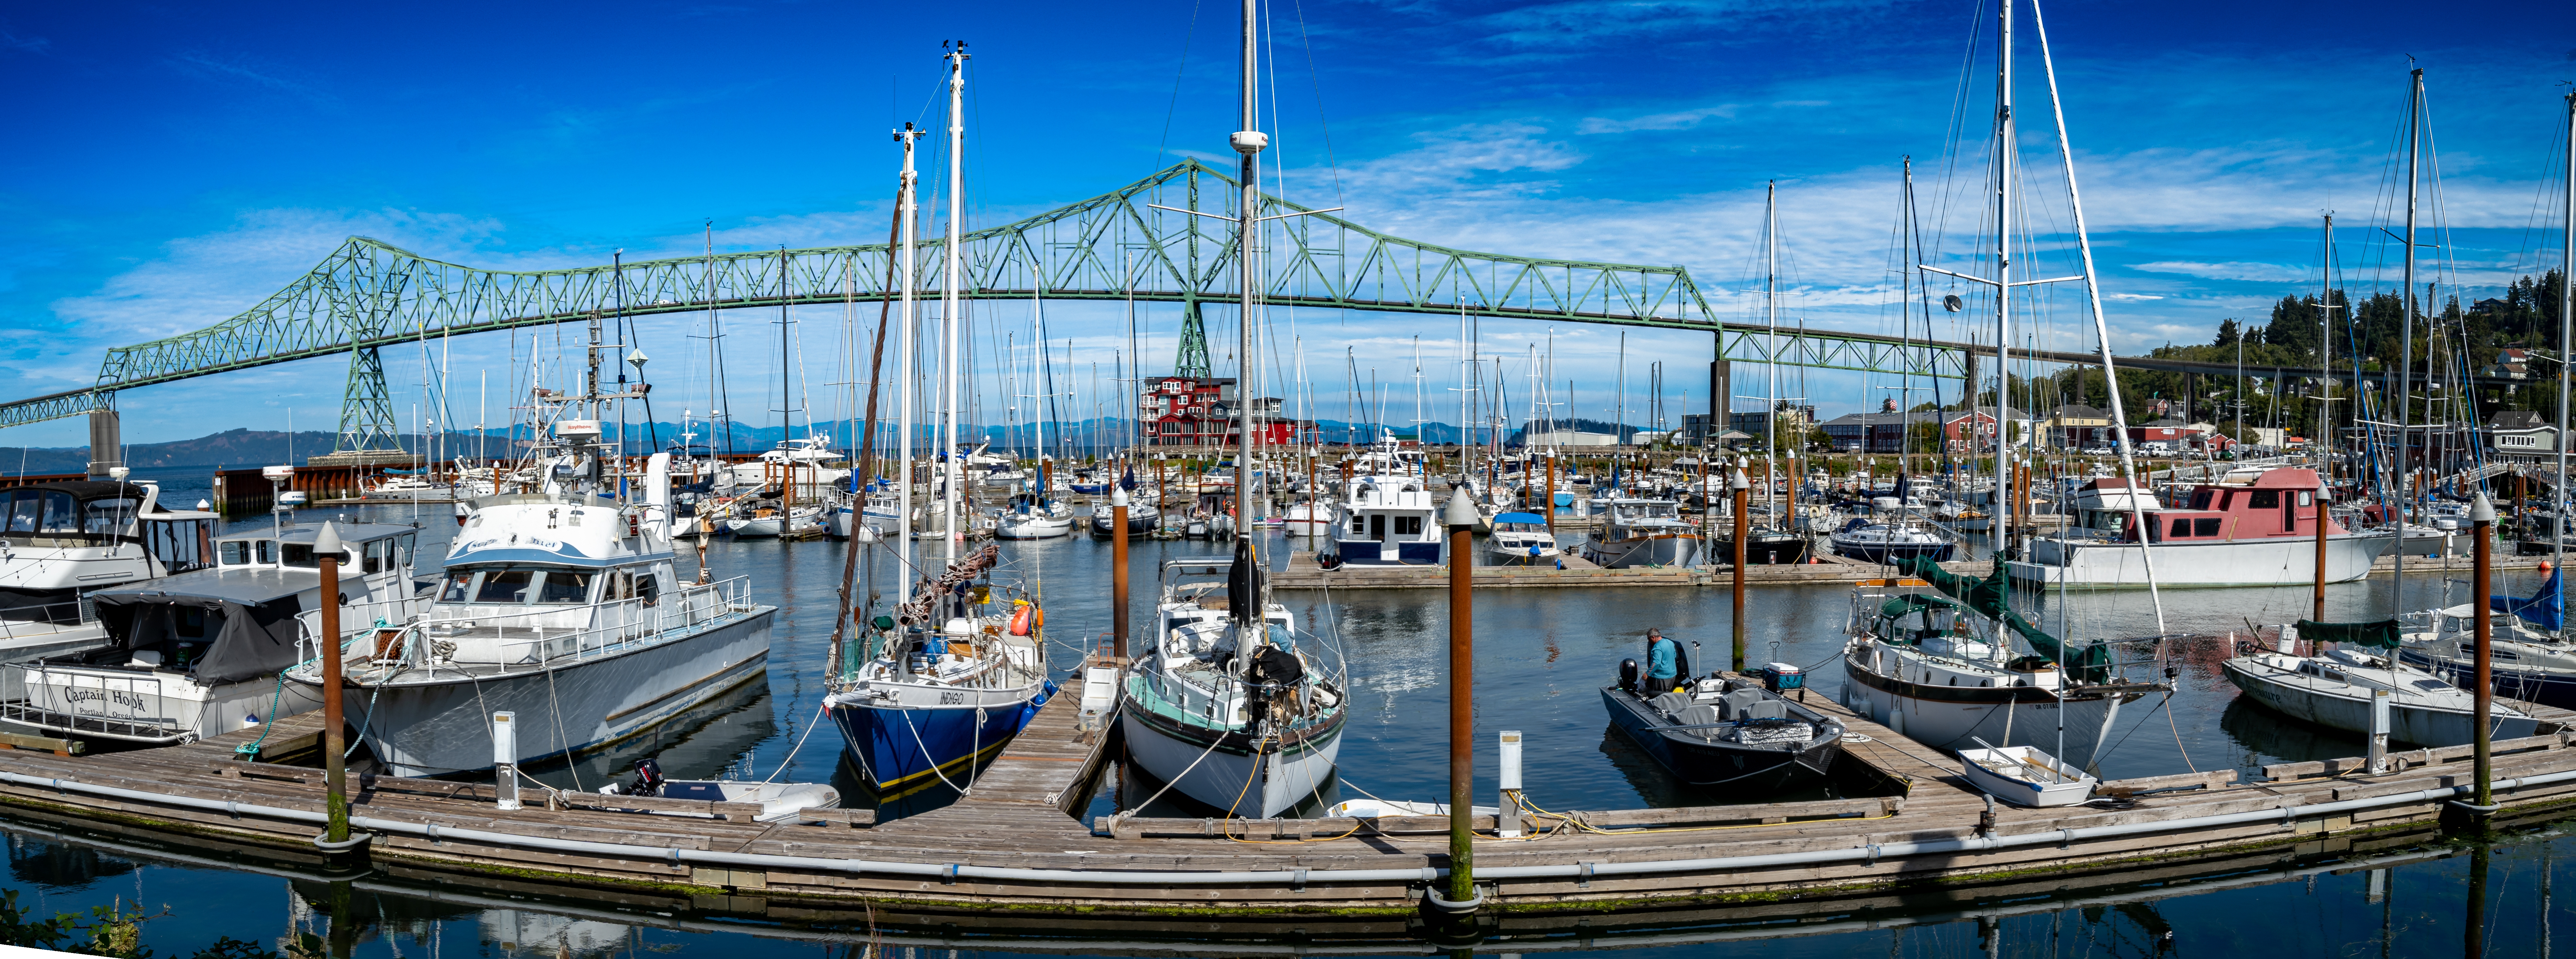 A panoramic view of Commercial fishing boats at a moorage in Astoria, Oregon.